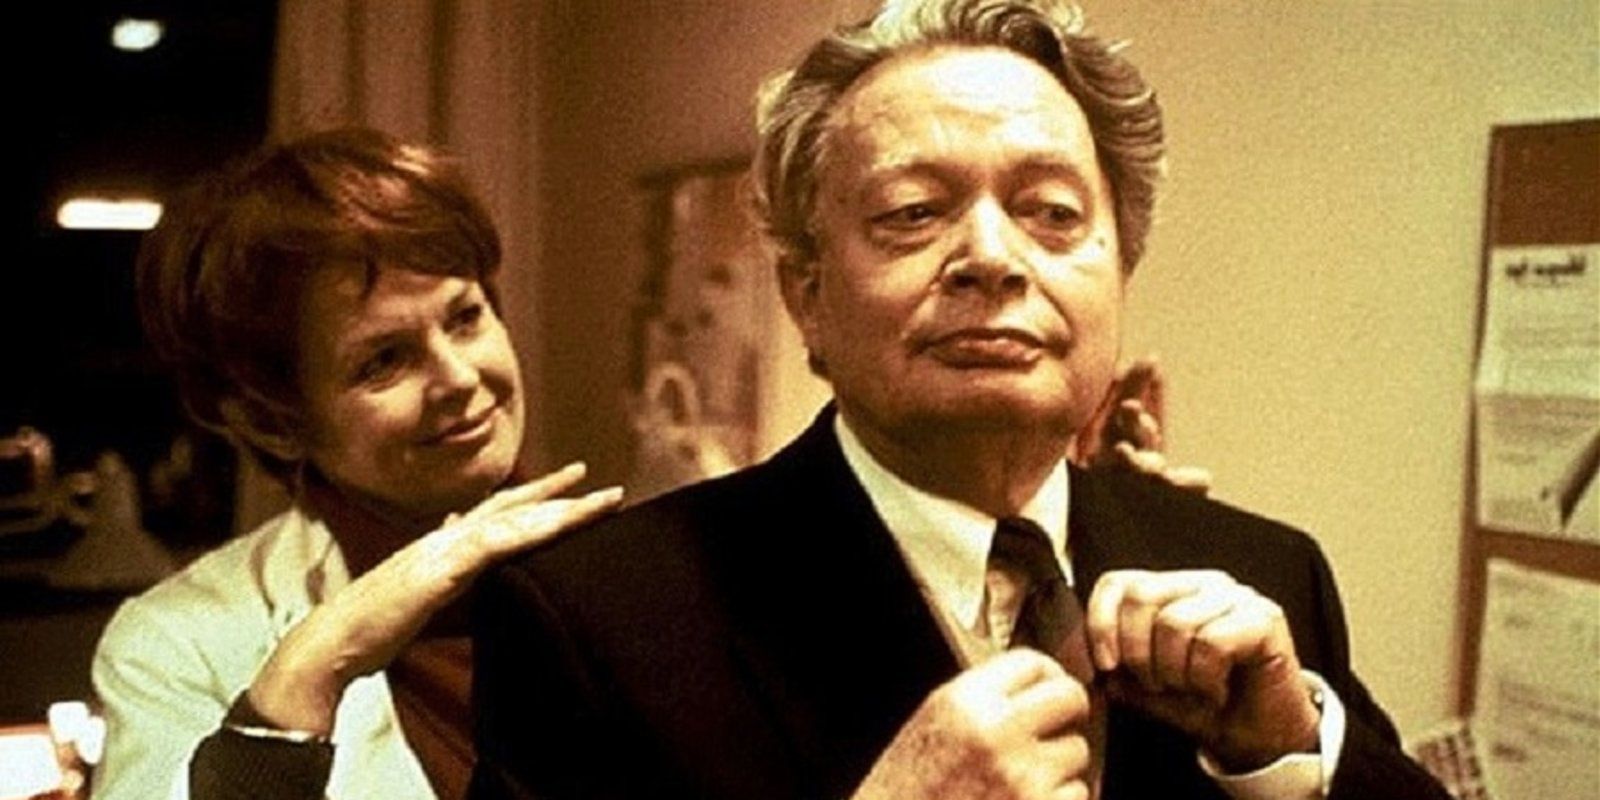 A scene from Lars von Trier's TV show The Kingdom featuring a man knotting a tie while a woman gleefully looks at him